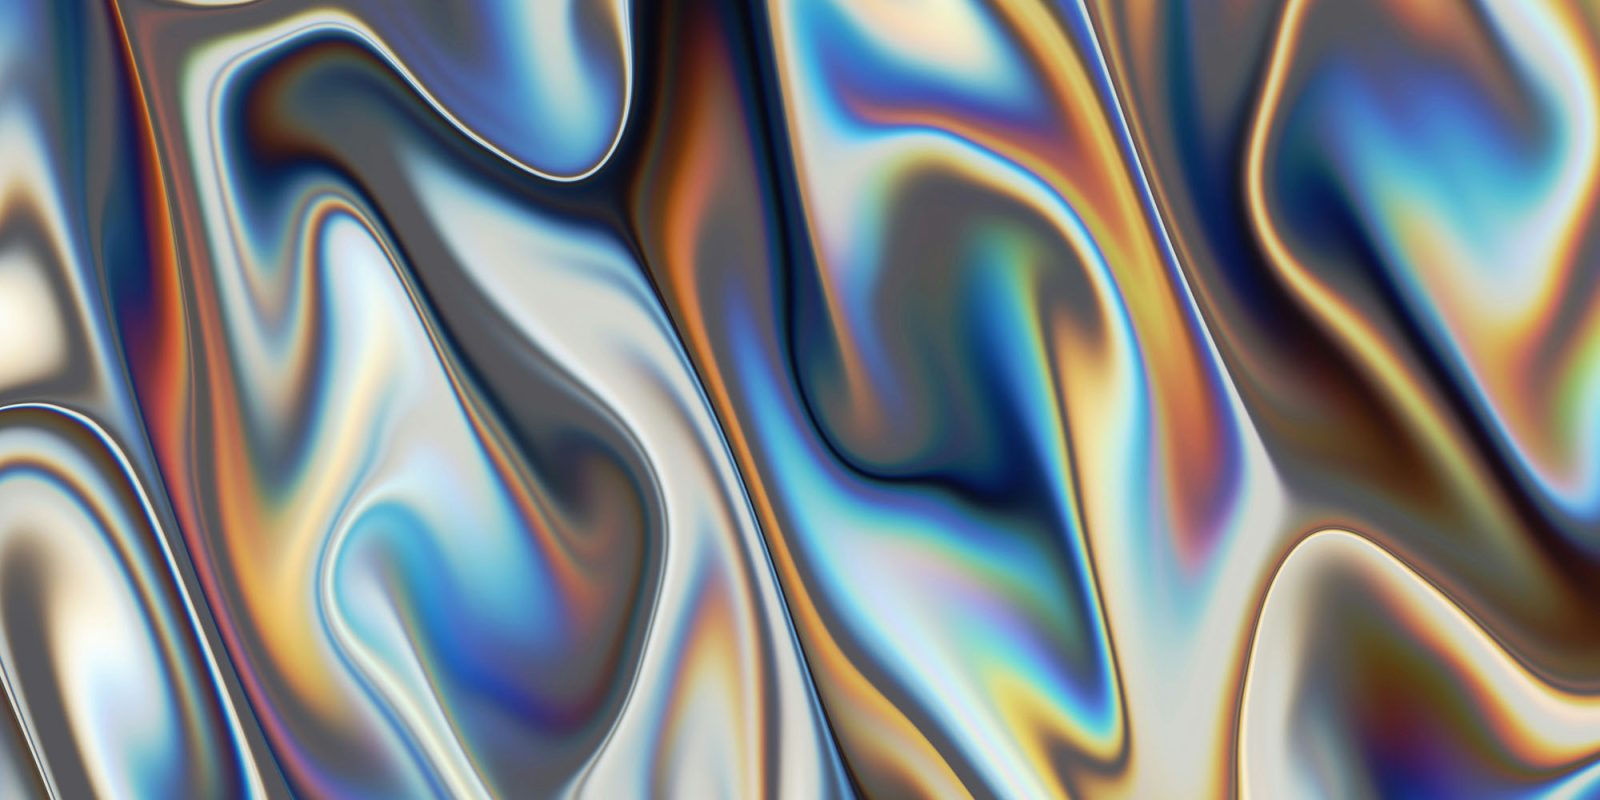 Tim Cook to 'hint' at Apple AI features | Abstract shiny silver and colorful image